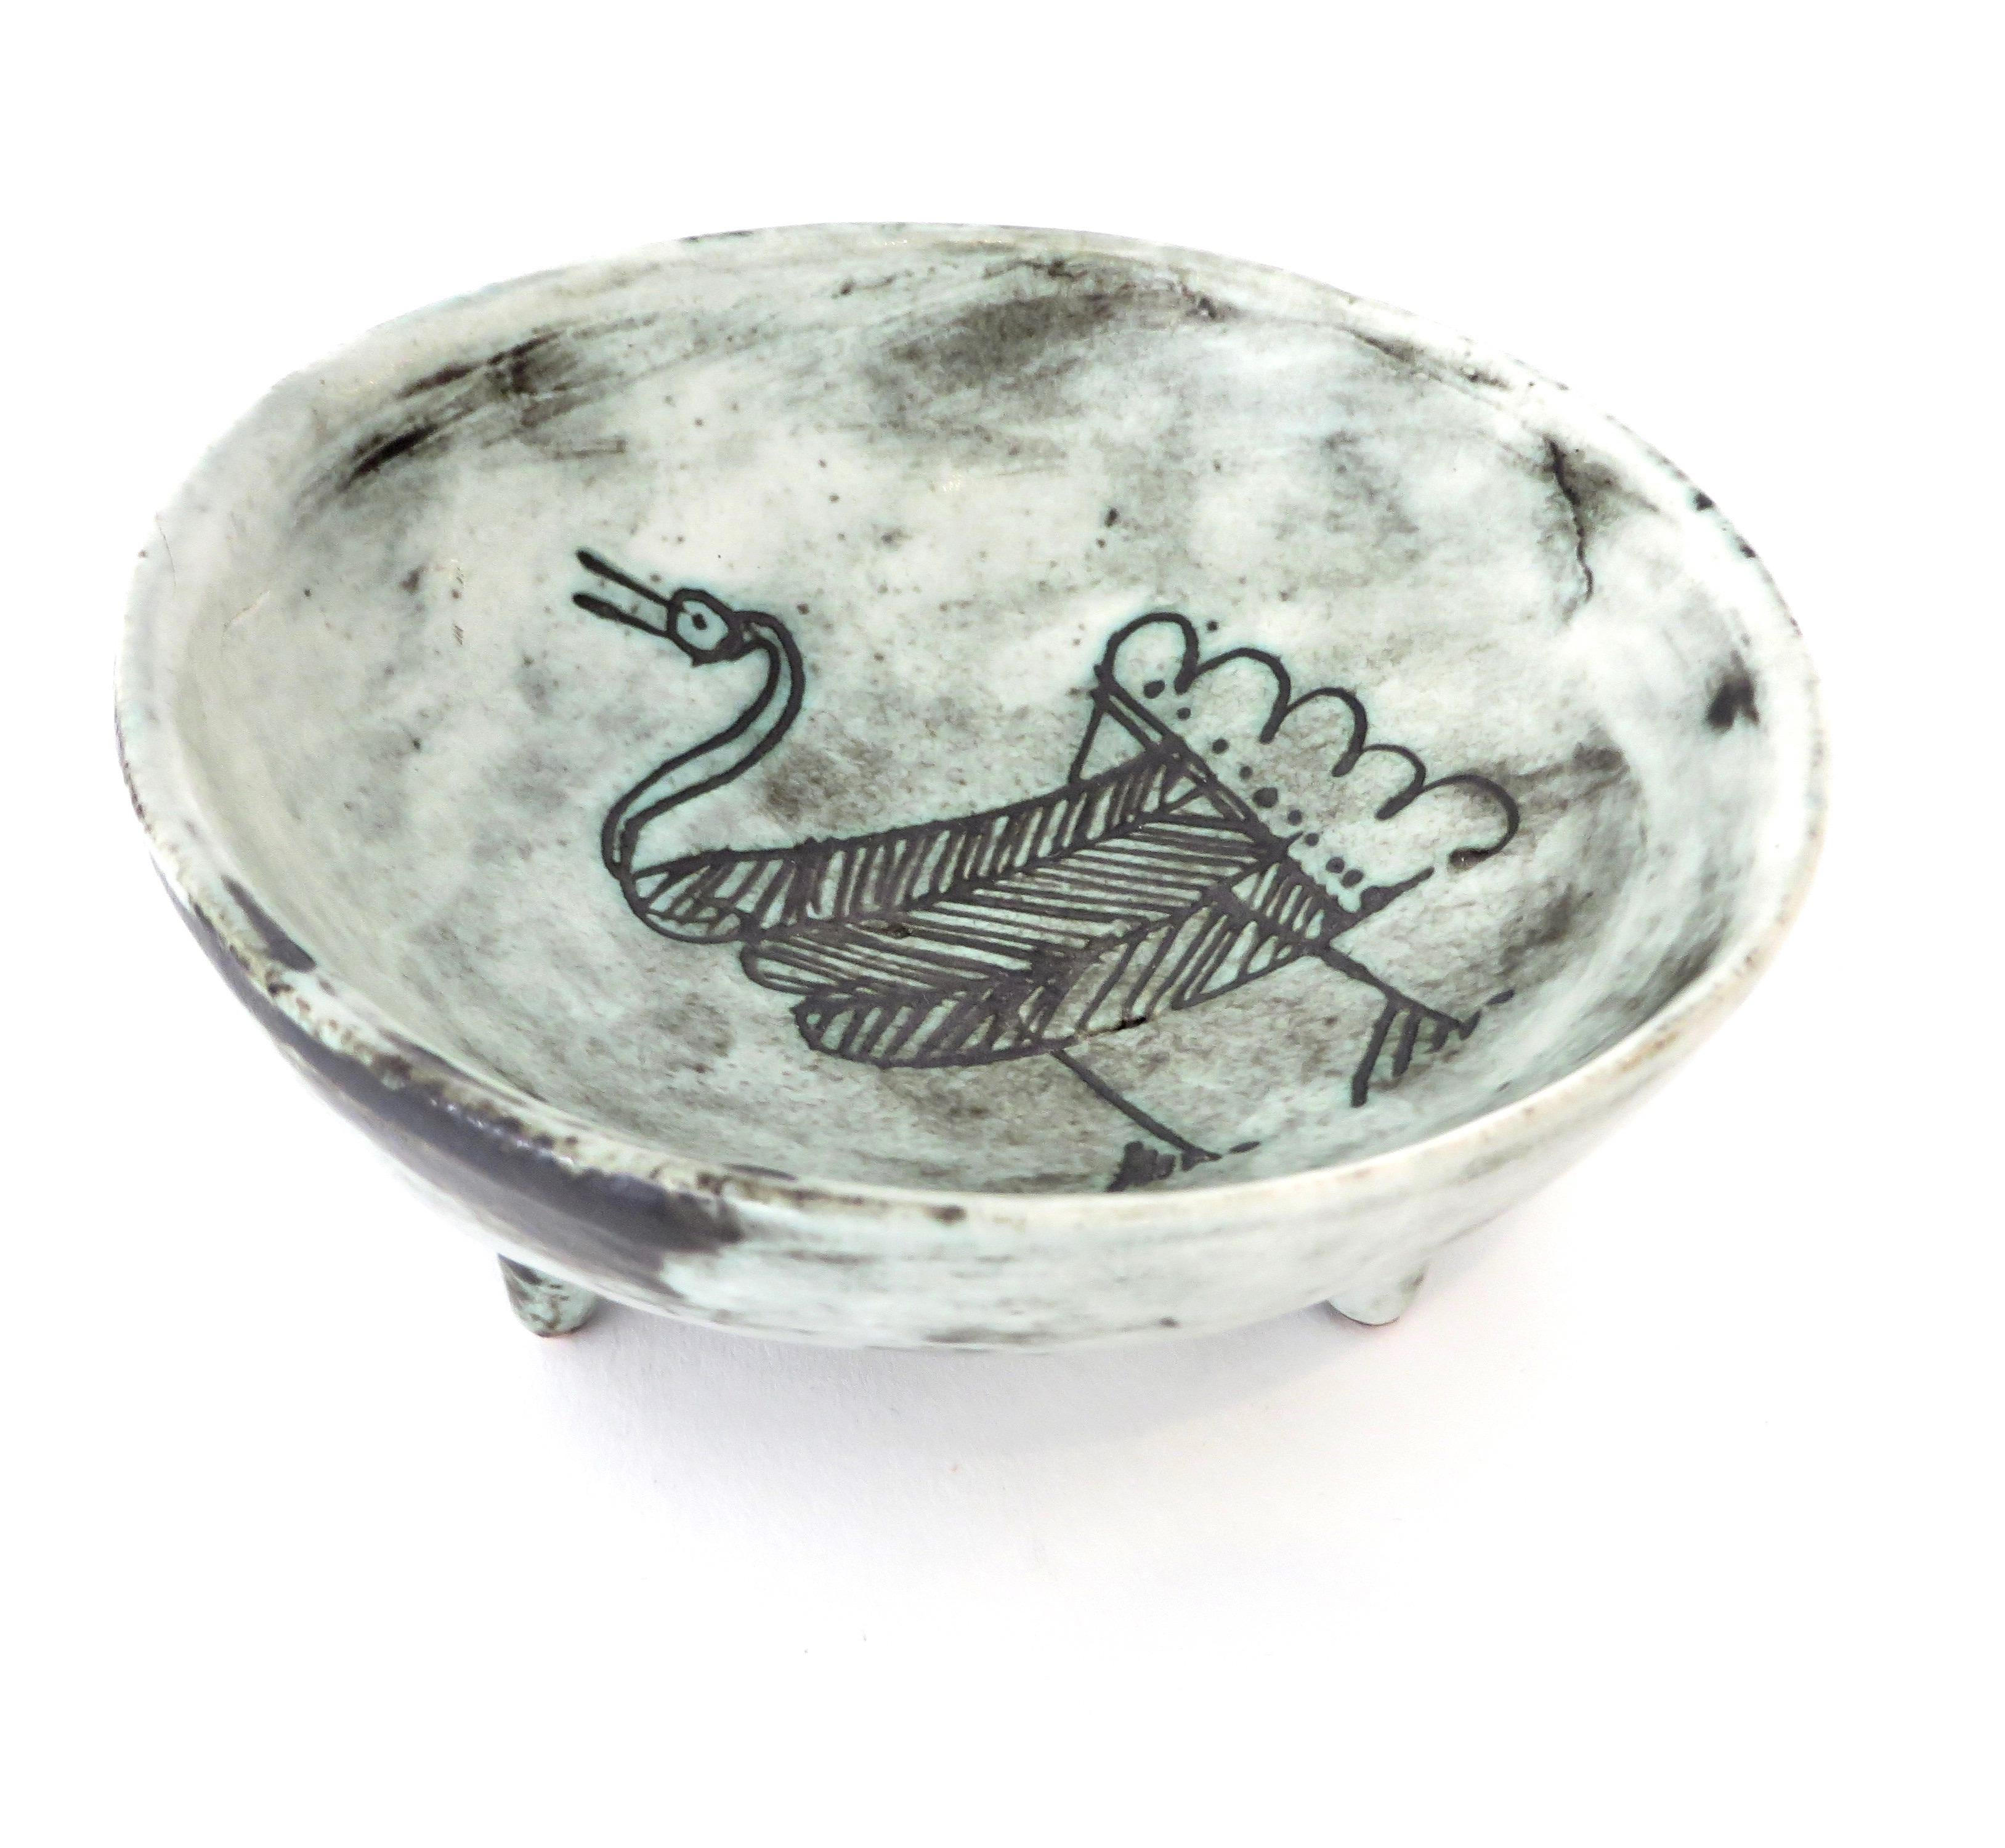 A French ceramic vide poche or small bowl by noted artist Jacques Blin with wonderful image of a bird in his iconic light blue glaze and sgraffito decoration. No chips or restorations. Signed. 
Part of a nice collection and each piece is listed